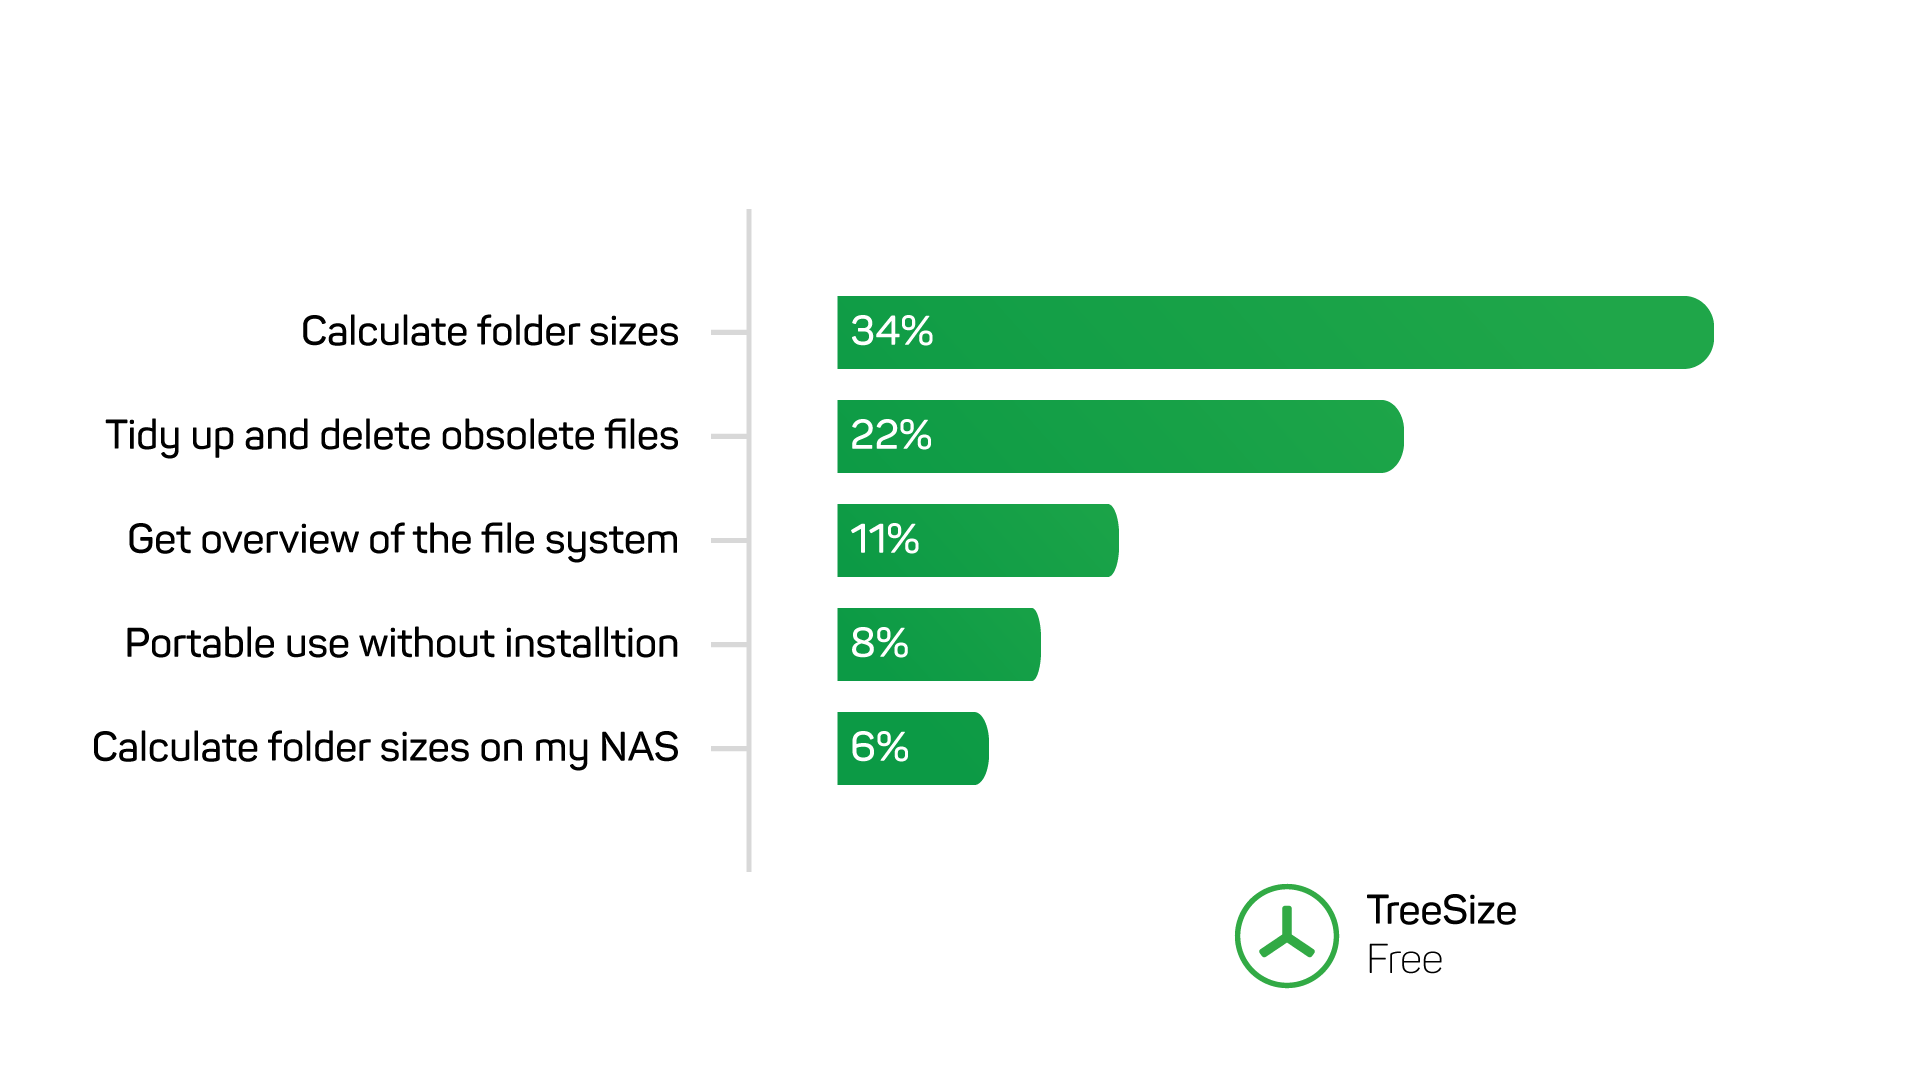 TreeSize Free most popular use cases